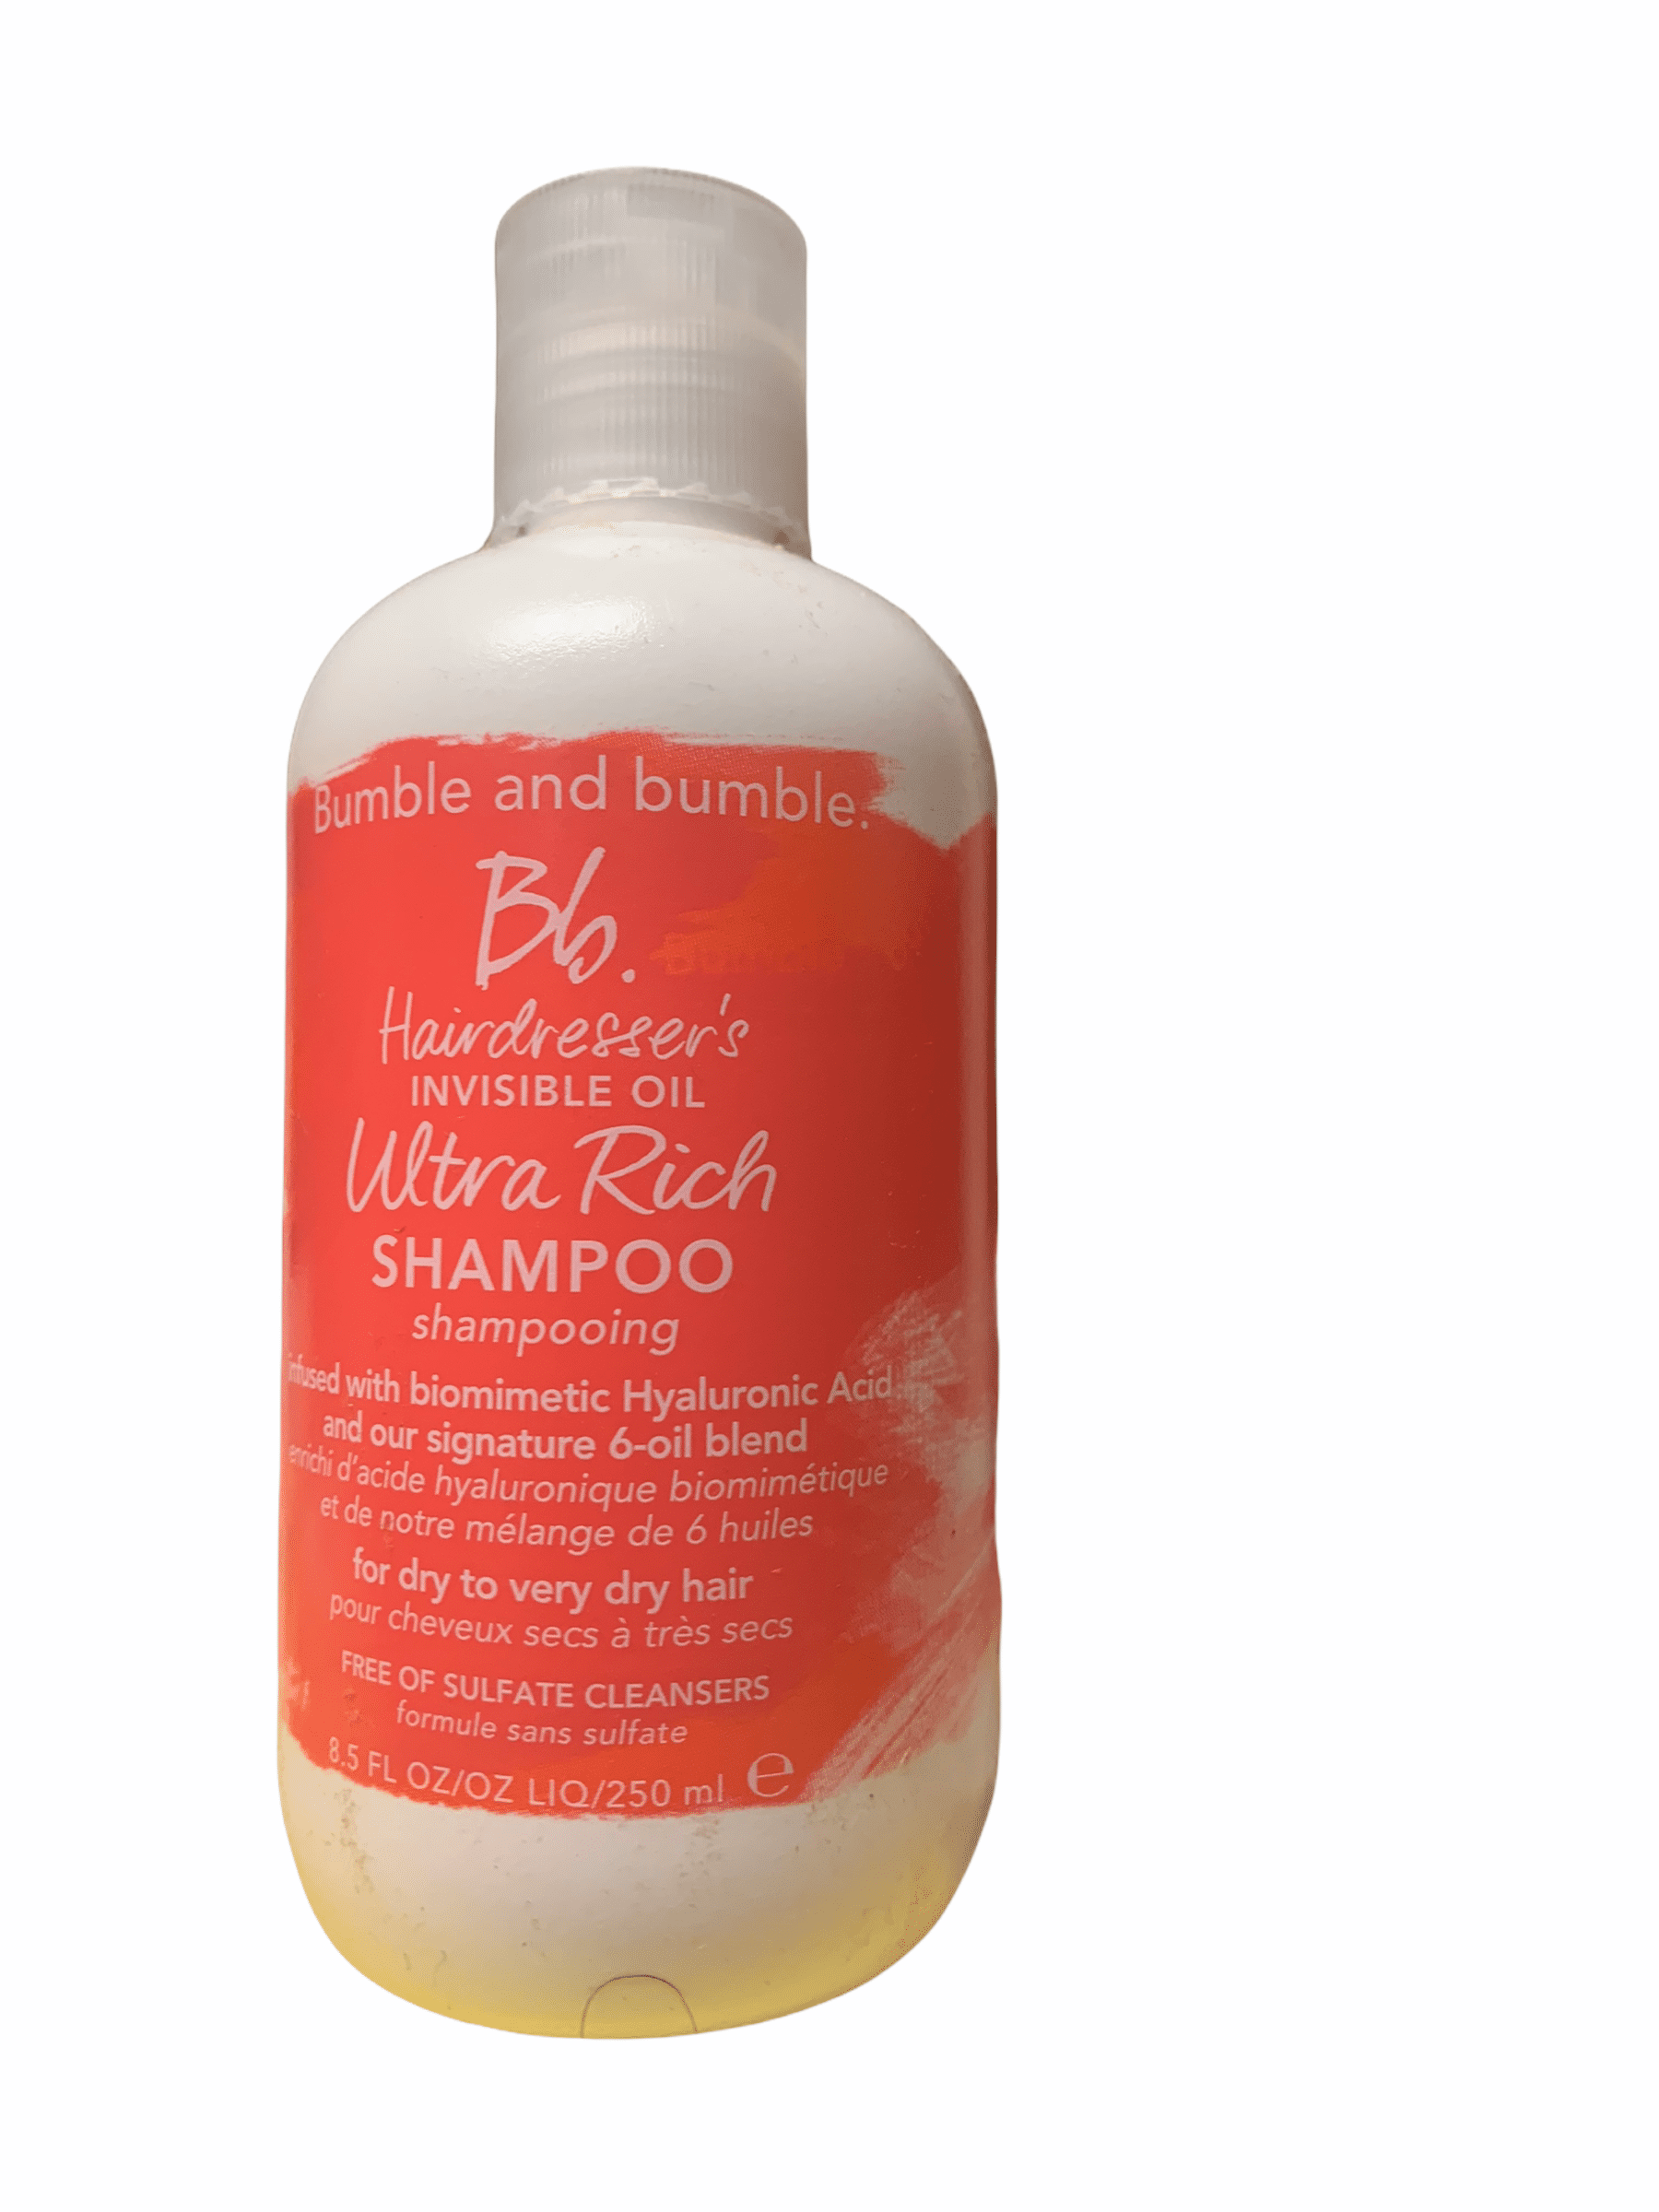 Bumble and Bumble - Hairdresser's Invisible Oil Ultra Rich Shampoo 8.5 oz